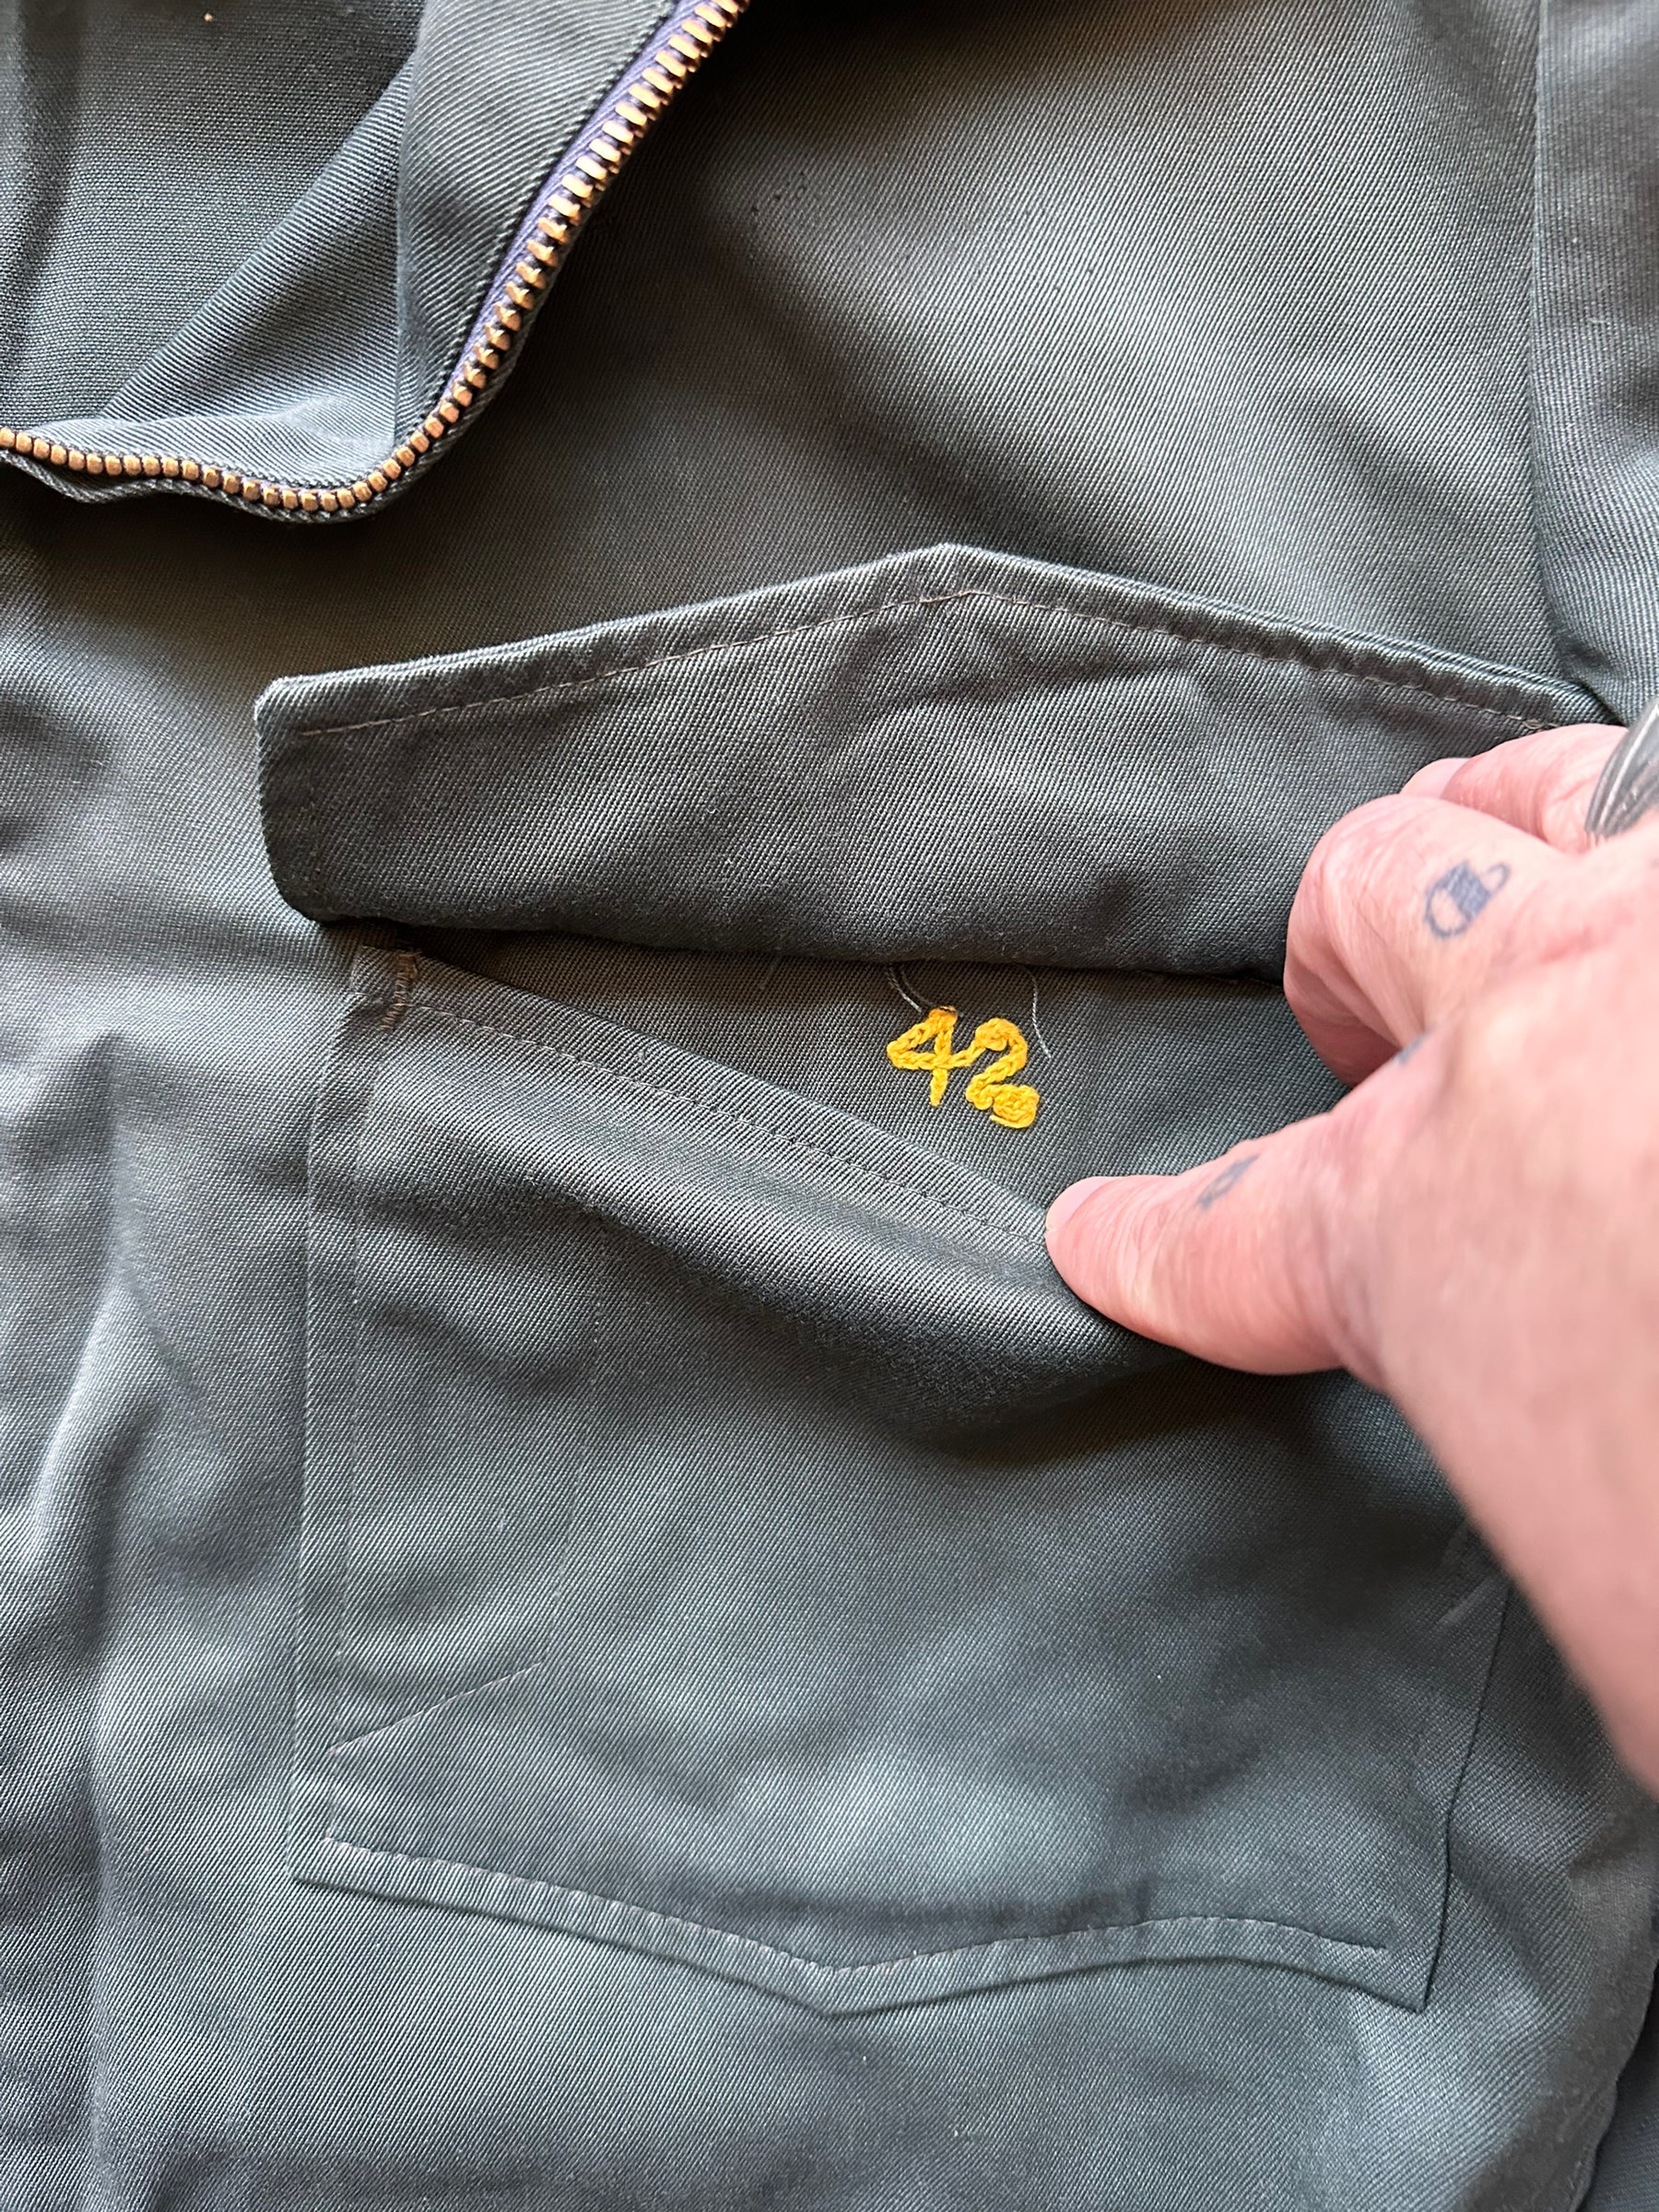 Sizing in Pocket on Vintage Day's Gas Station Jacket SZ 42 | Vintage Workwear Jacket Seattle | Seattle Vintage Clothing